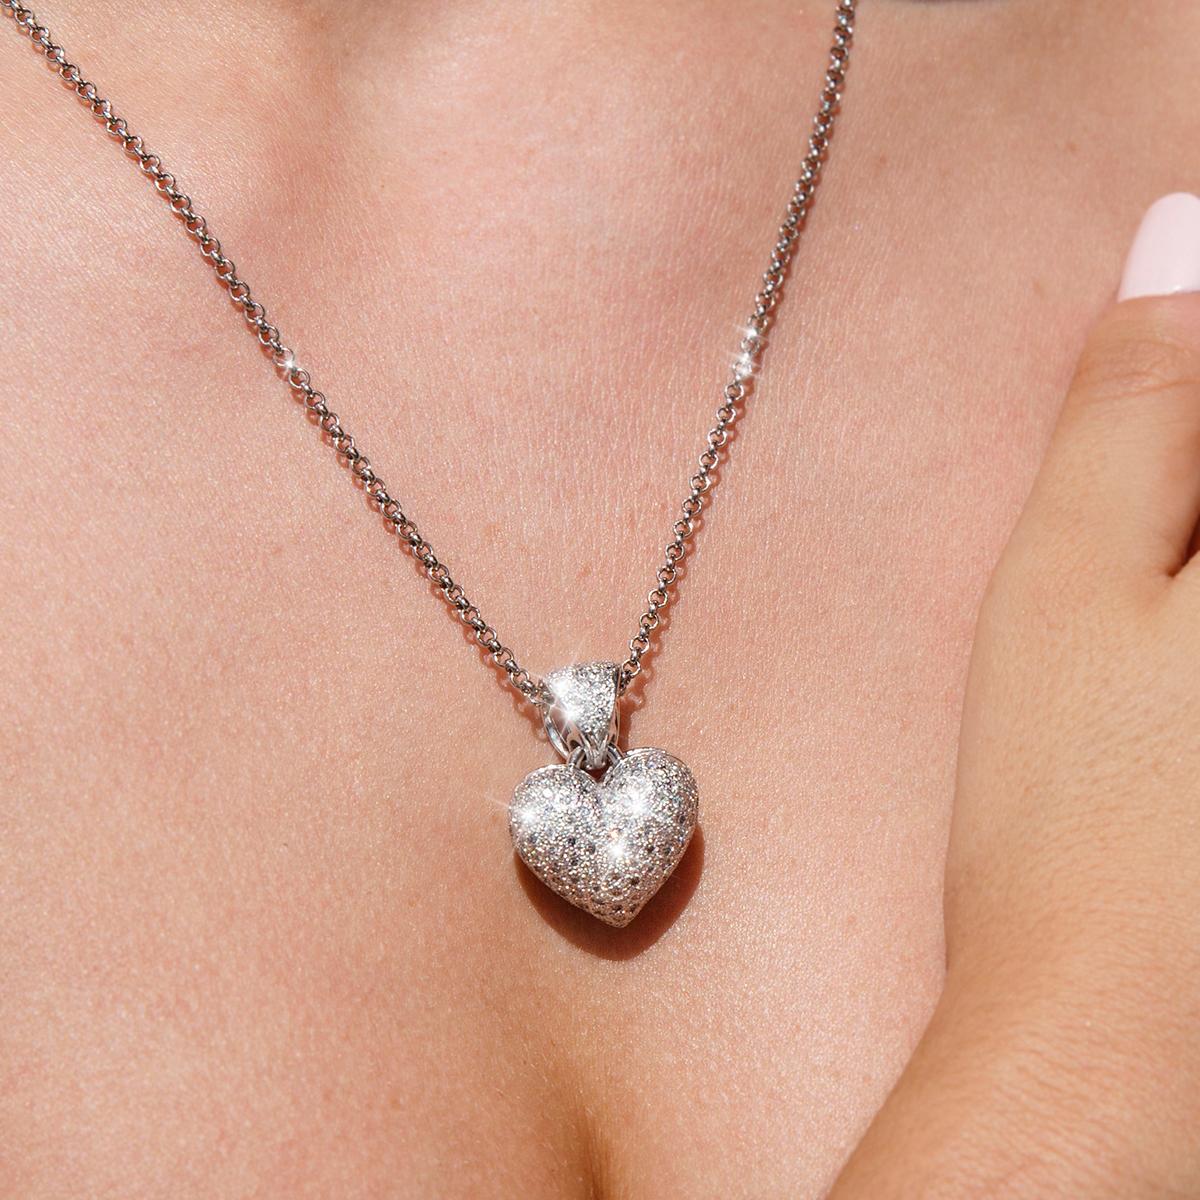 Crafted in 9 carat white gold, this adorable vintage pendant is in the shape of a heart. The front surface of the pendant is encrusted with sparkling pave set round brilliant cut diamonds, and the high polish back features a filigree frame with a